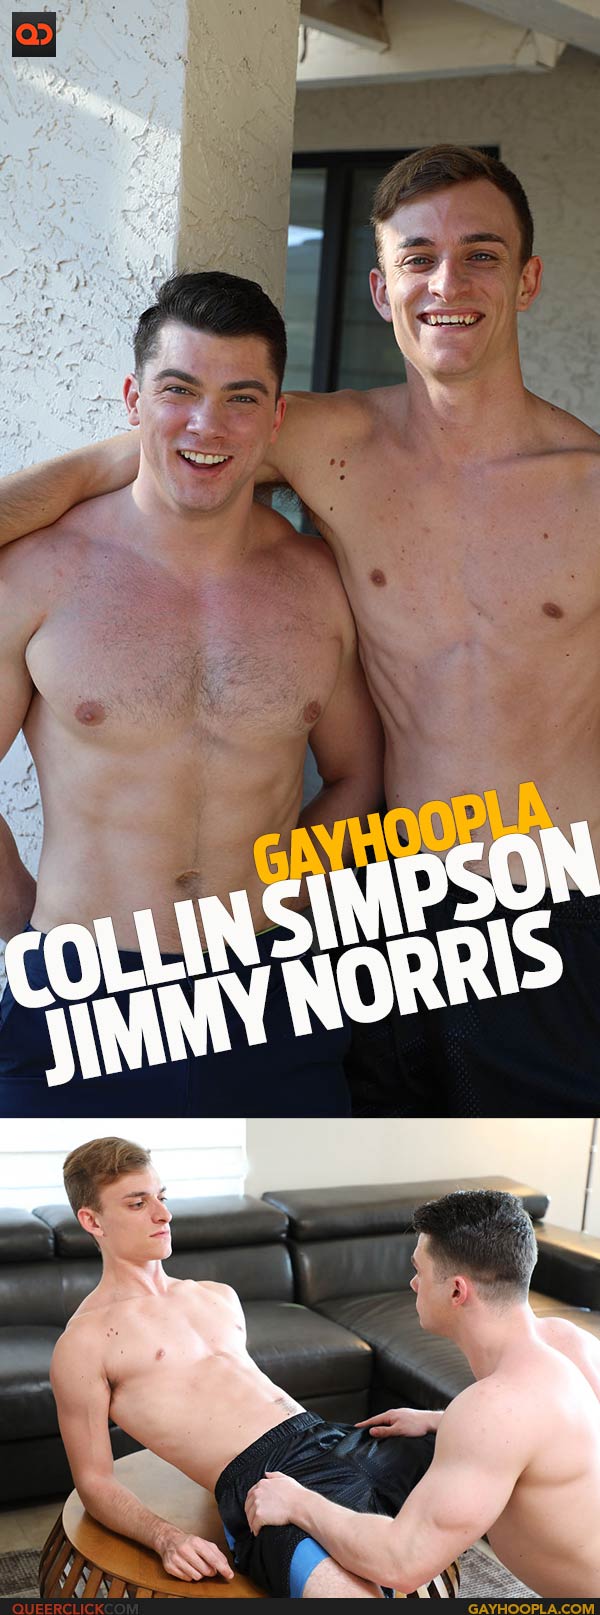 GayHoopla: Collin Simpson and Jimmy Norris